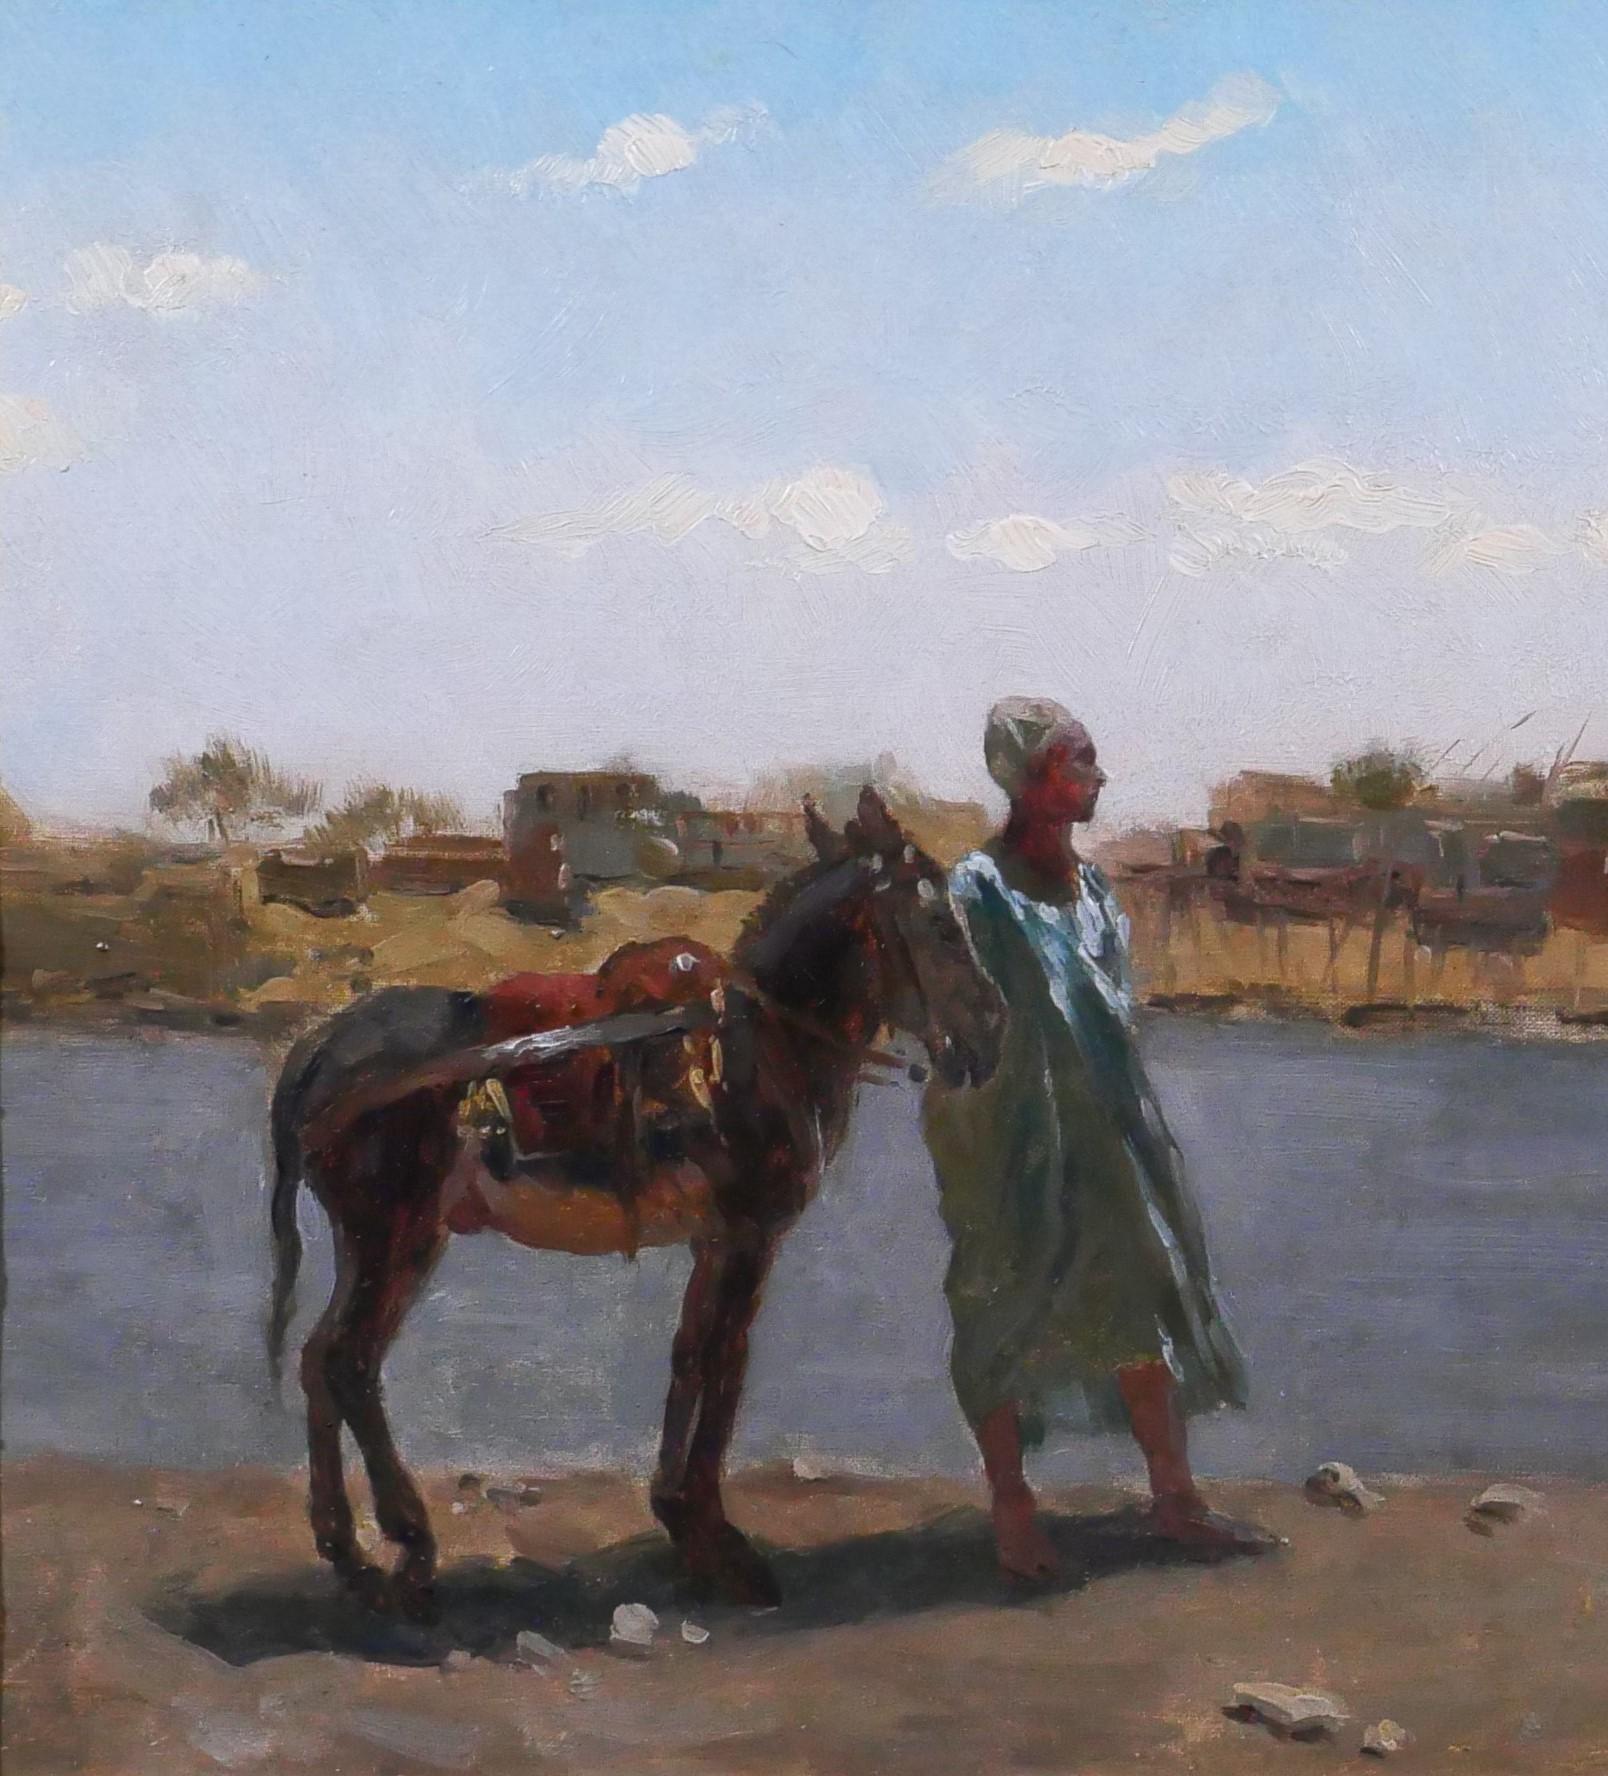 Antoine van Hammée (attributed to)
Mechelen, 1836 - Schaerbeek, 1903, Belgian
Orientalism, landscape with man and donkey
Painting, oil on canvas
Unsigned, an old label on the back with the name of the painter and the date
Painting: 36 x 27 cm
Modern